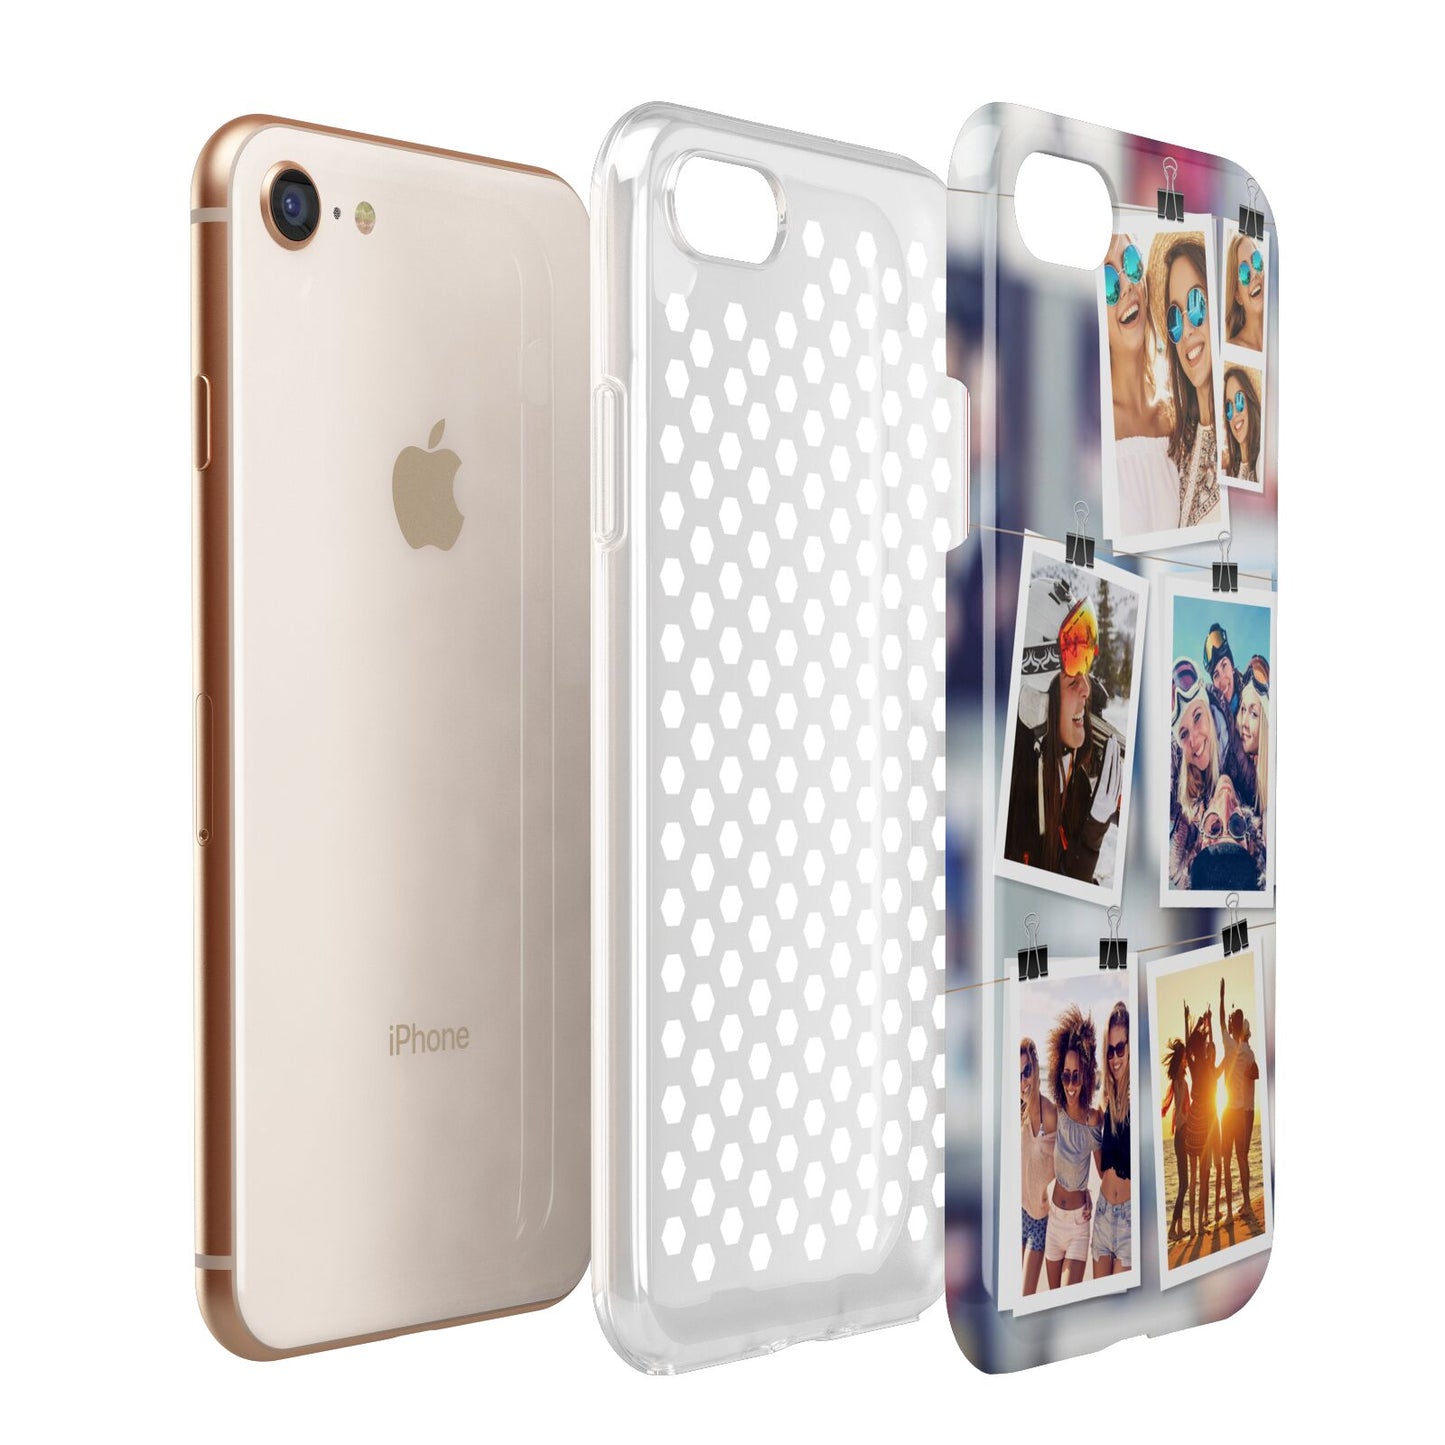 Photo Wall Montage Upload Apple iPhone 7 8 3D Tough Case Expanded View